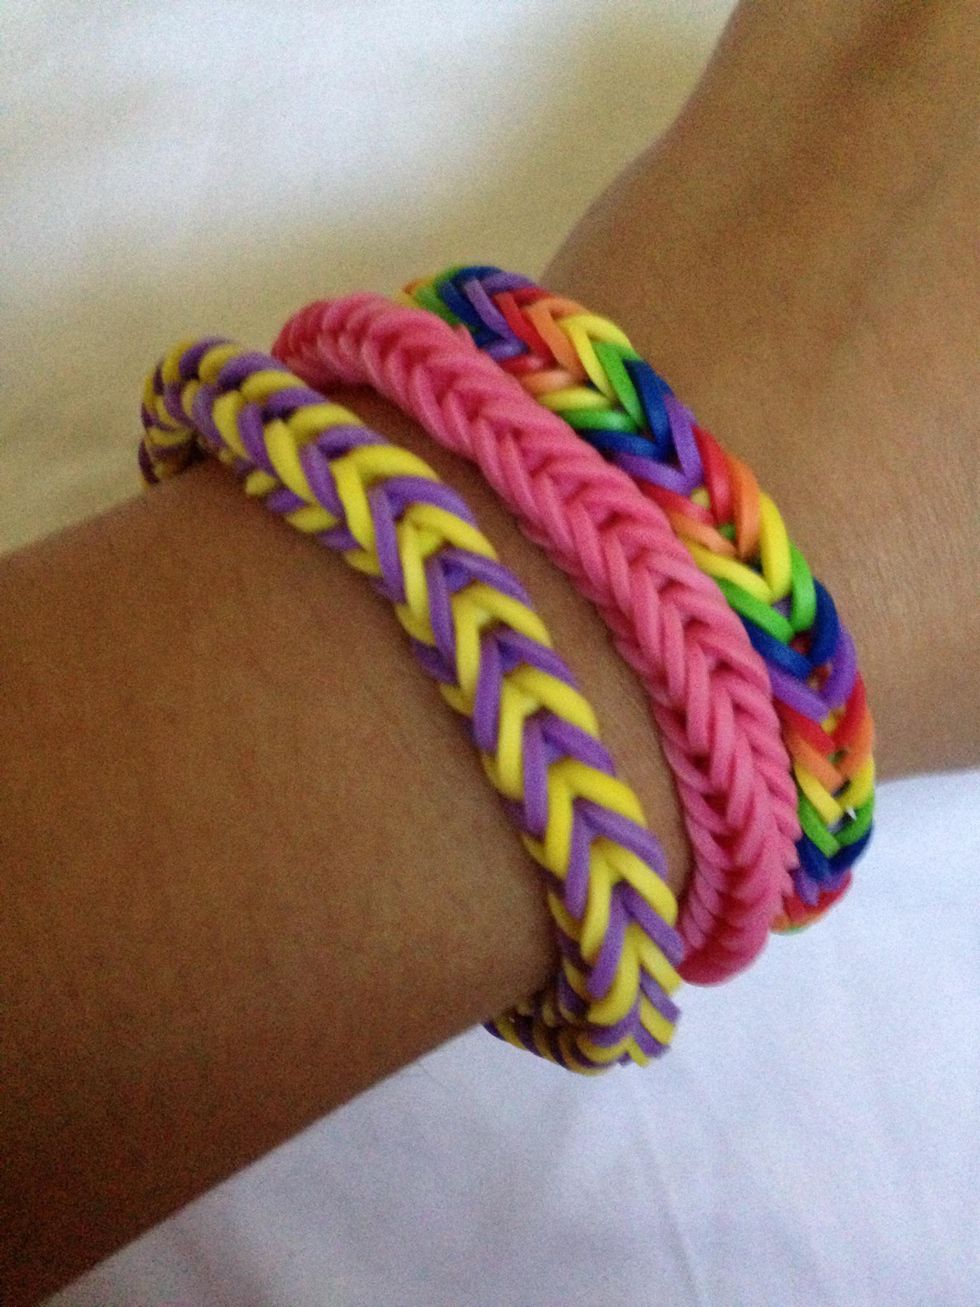 How to make a rainbow loom fishtail bracelet - B+C Guides